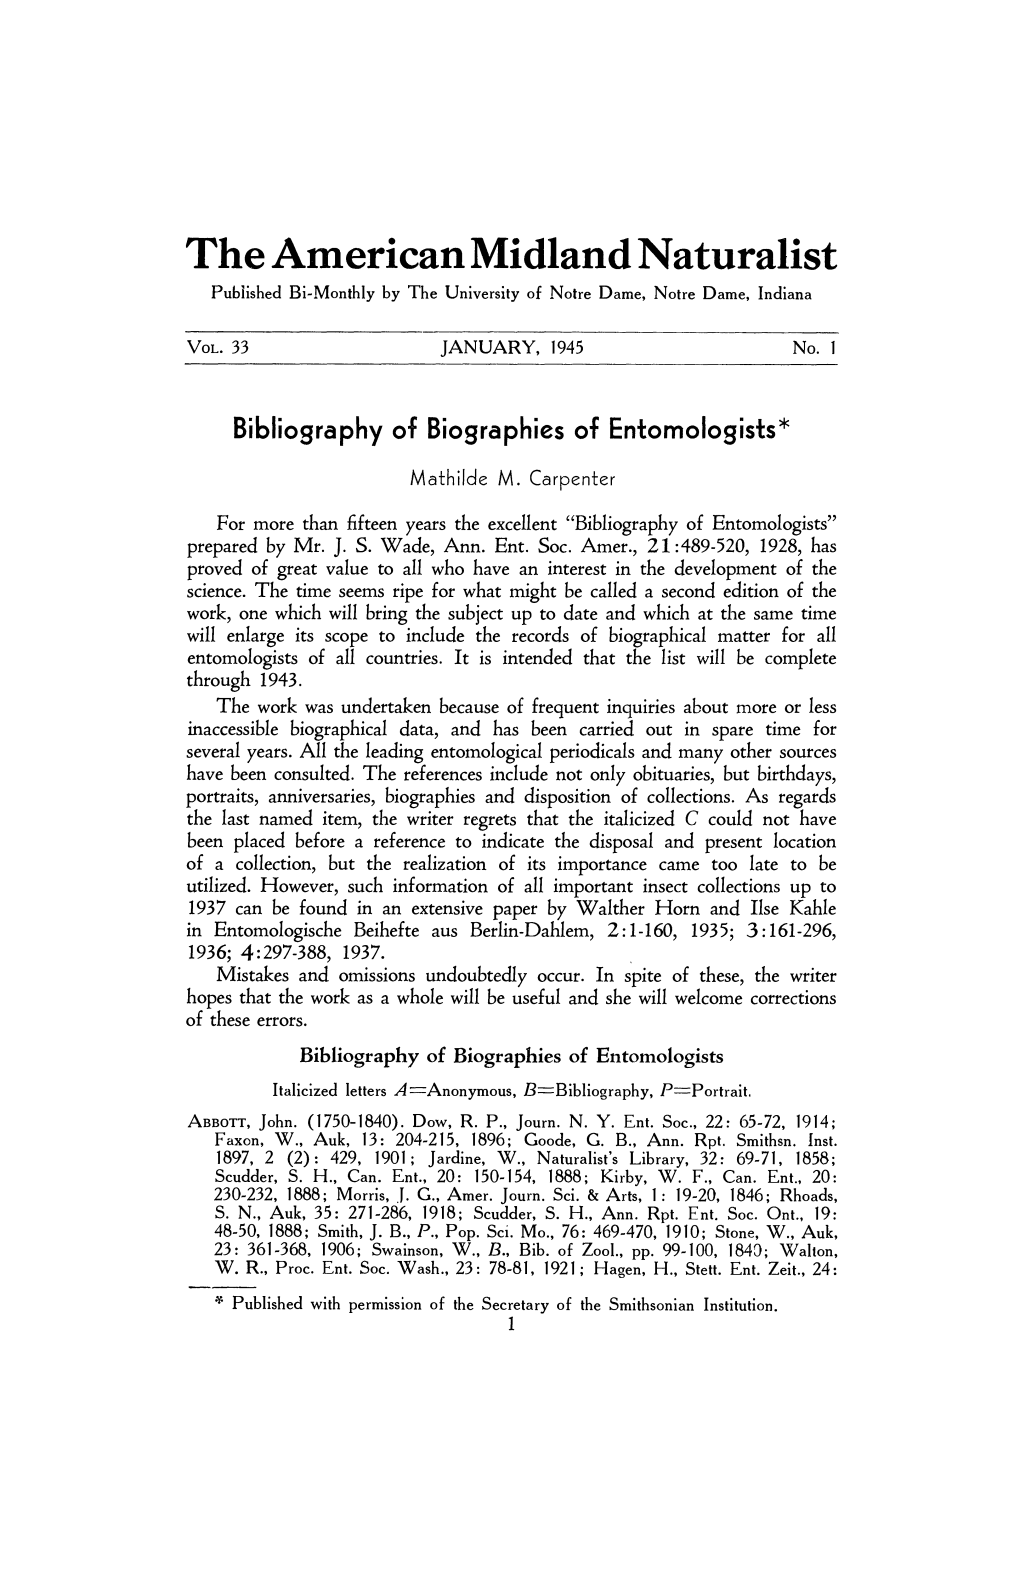 Bibliography of Biographies of Entomologists Italicizedletters A-Anonymous, B=Bibliography, P=Portrait